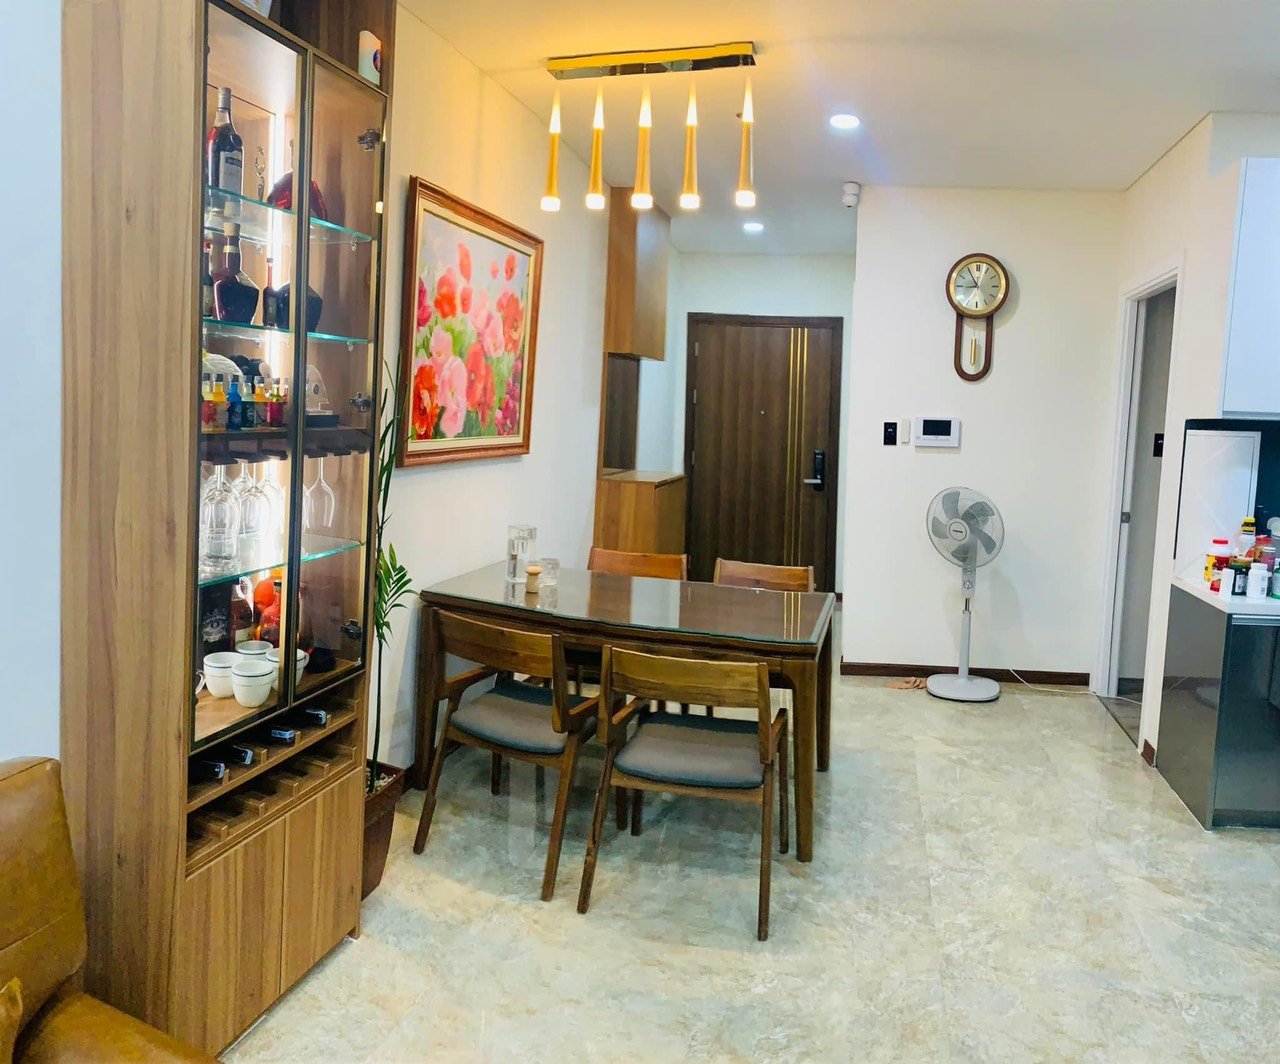 Monarchy apartment for rent with 2 bedrooms cheap price !!! 1